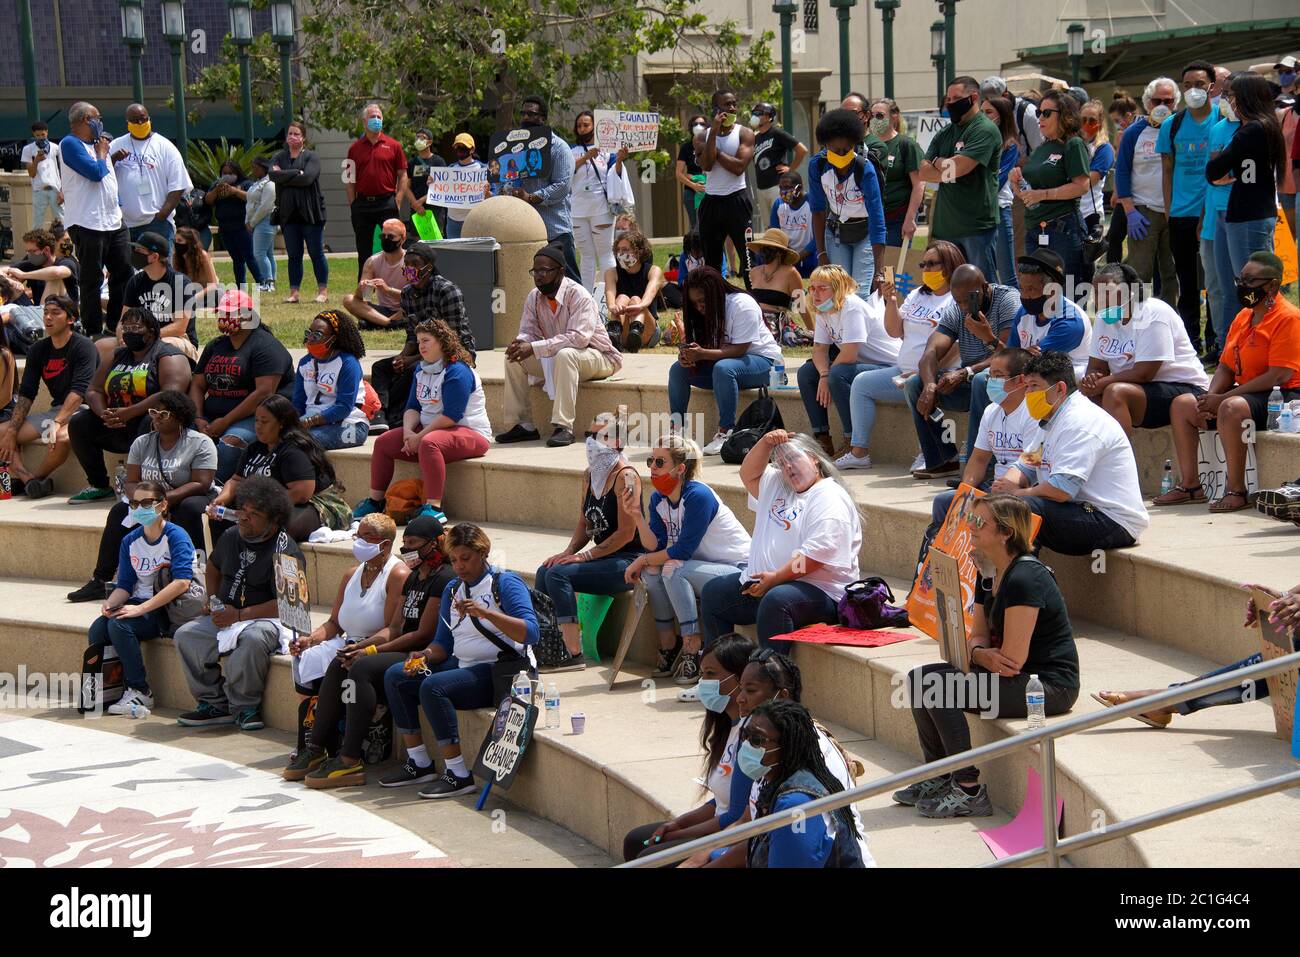 Oakland, CA - June 10, 2020: Protestors participating in  the George Floyd Black Lives Matter protest in Oakland, Rally at City Hall on 14th and Broad Stock Photo